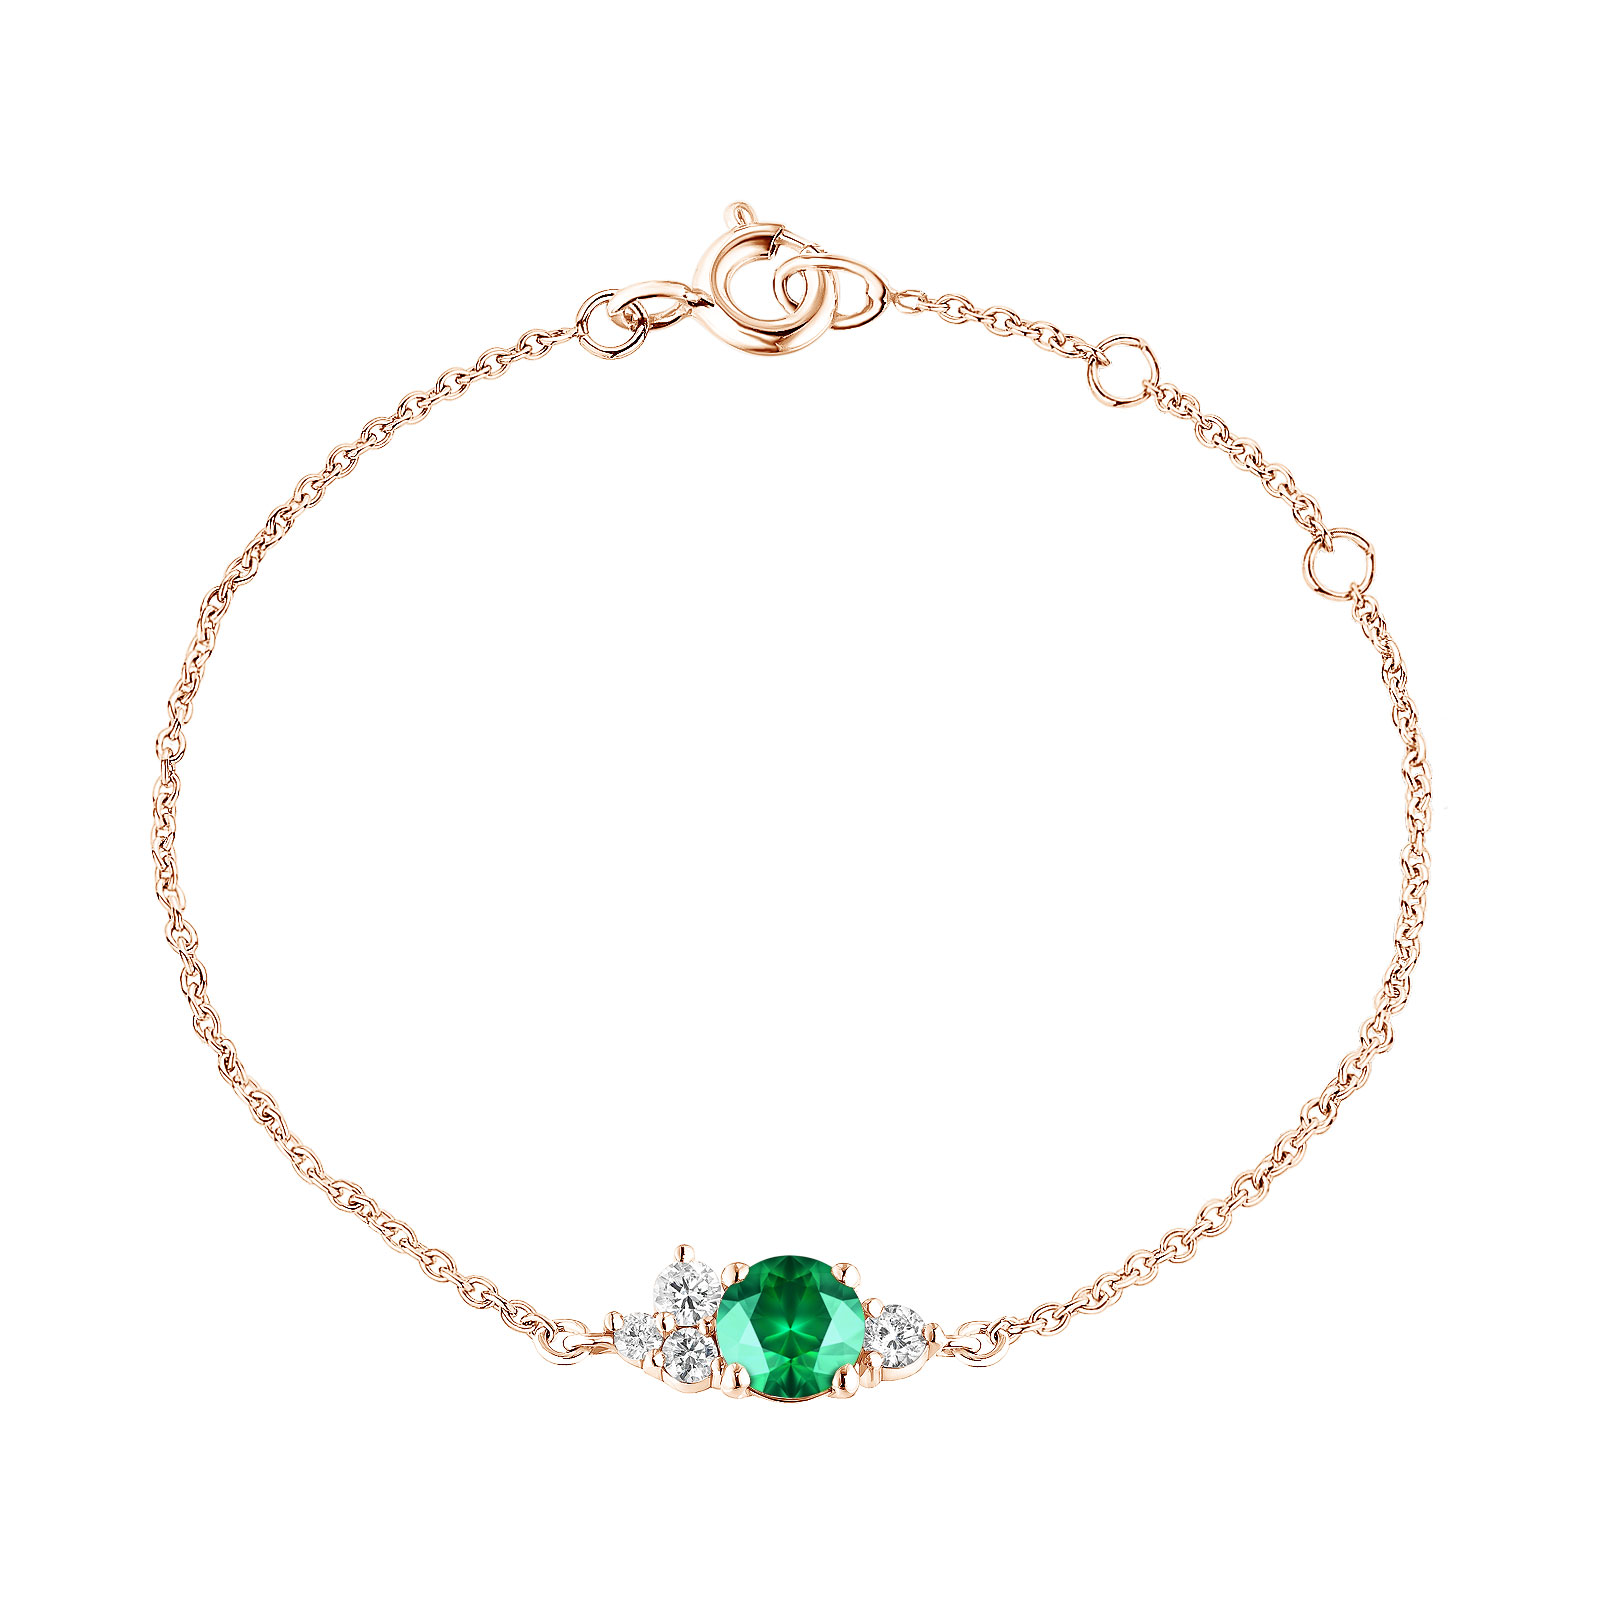 Bracelet Rose gold Emerald and diamonds Baby EverBloom 1